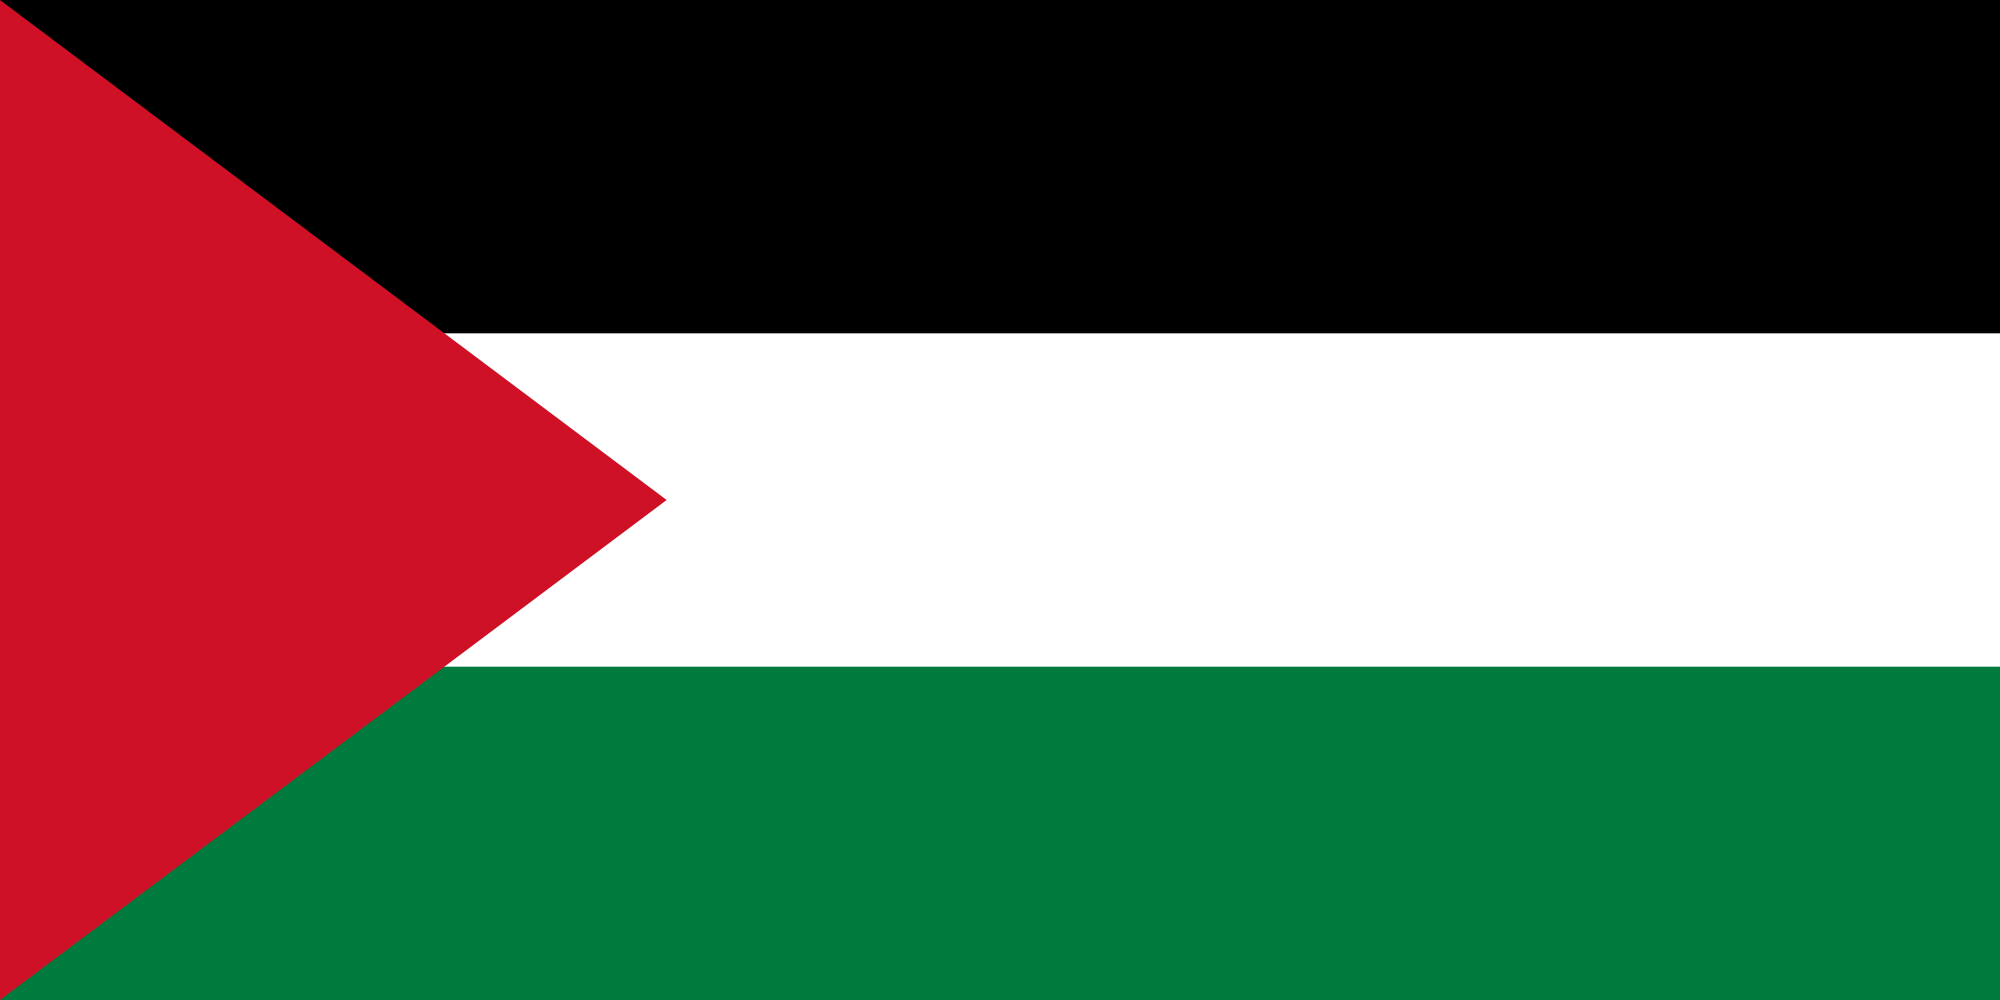 https://upload.wikimedia.org/wikipedia/commons/thumb/0/00/Flag_of_Palestine.svg/2000px-Flag_of_Palestine.svg.png